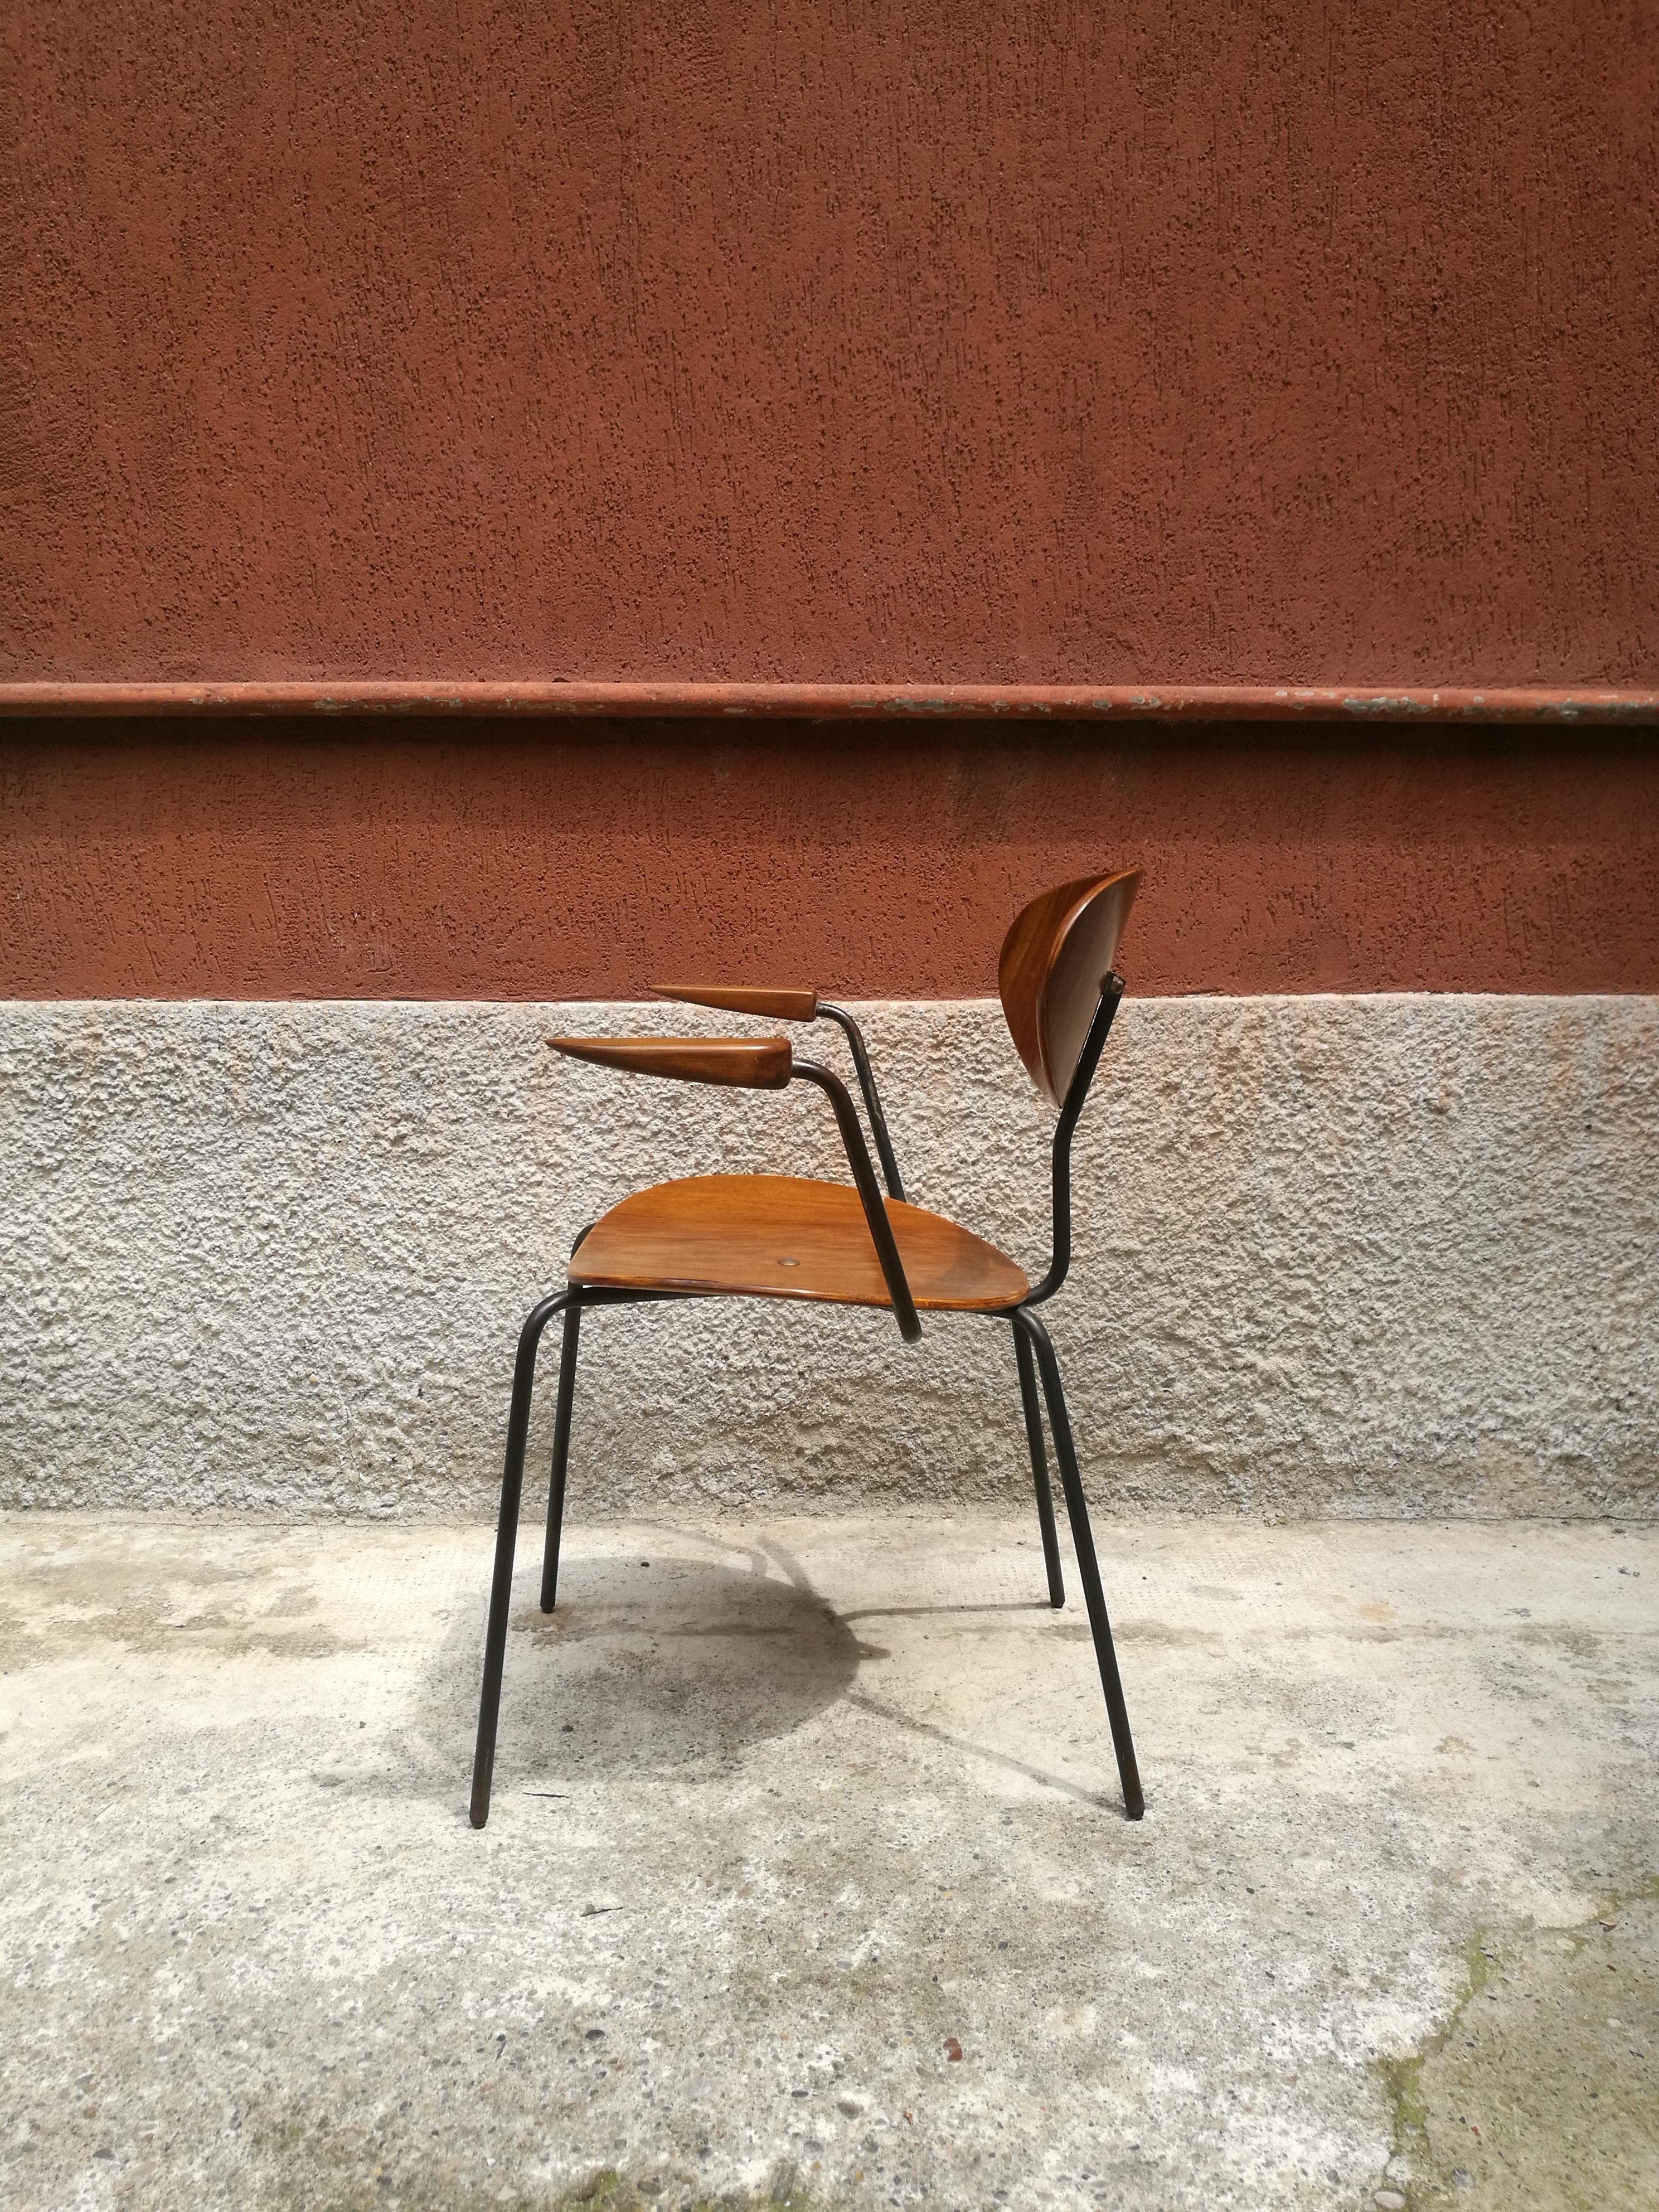 Mid-Century Modern Teak Chair with Armrests from Germany, 1960s